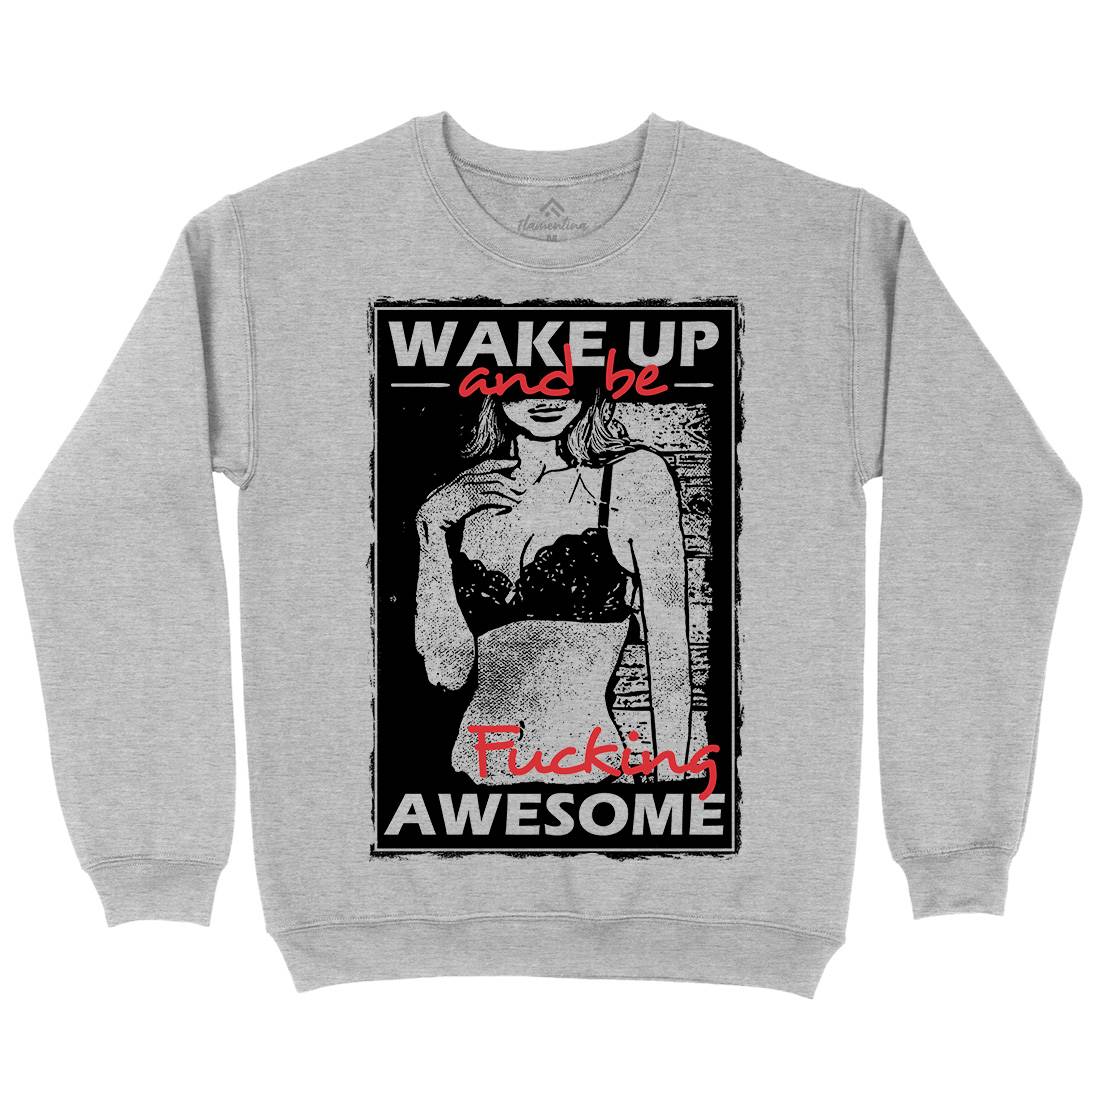 Wake Up And Be Awesome Mens Crew Neck Sweatshirt Gym C993